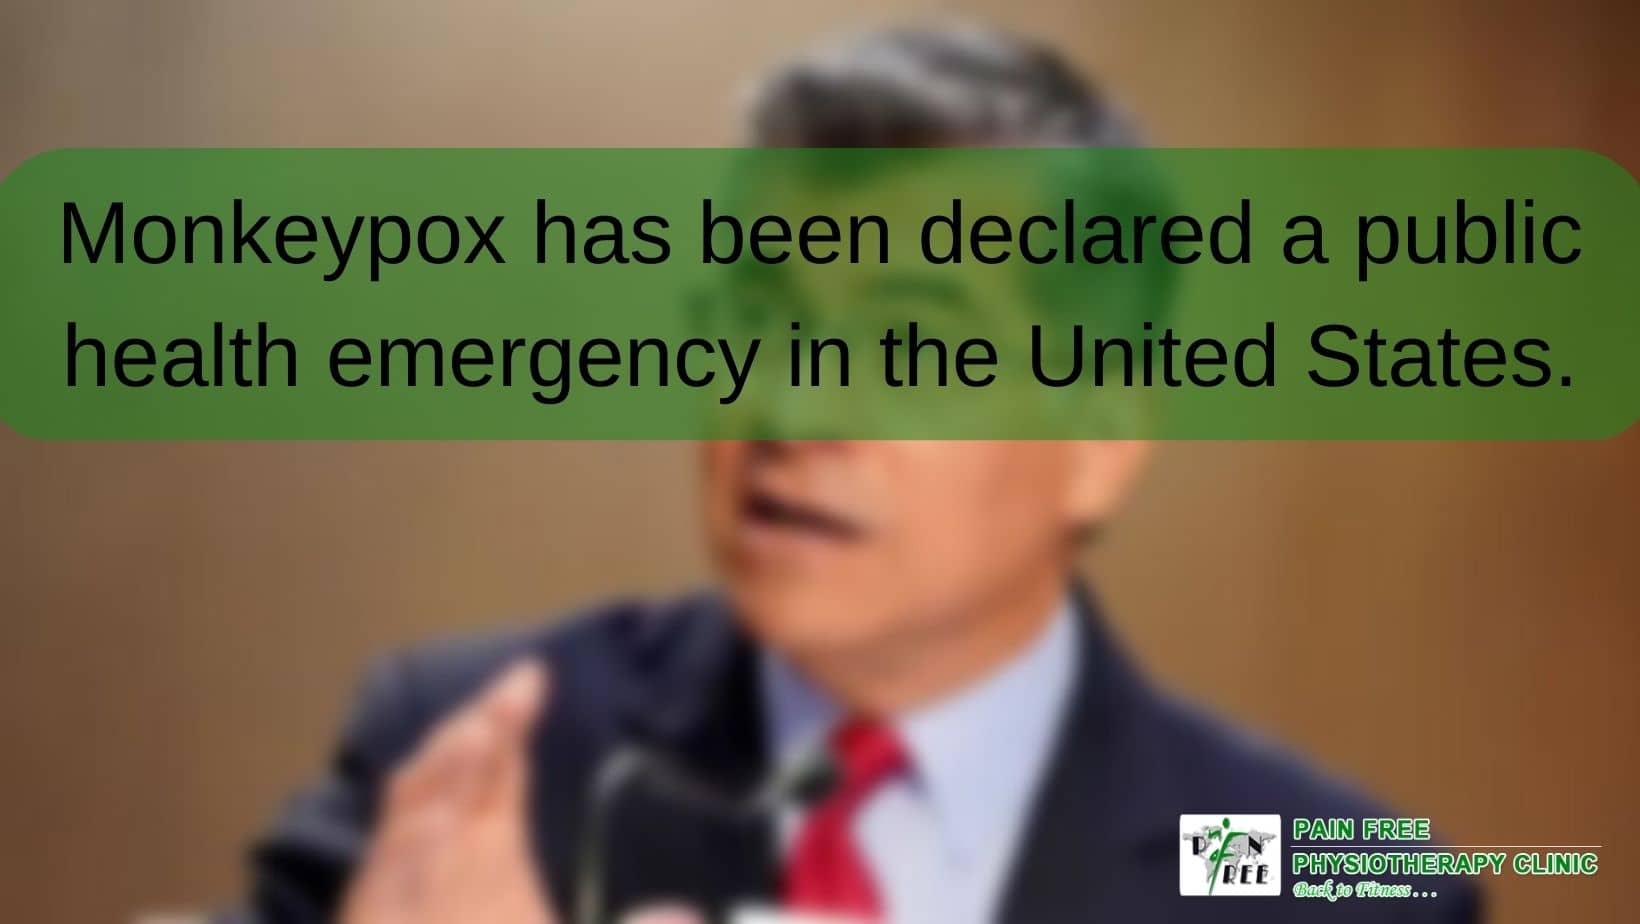 U.S. officials declare monkeypox a public health emergency | Pain Free Physiotherapy Clinic